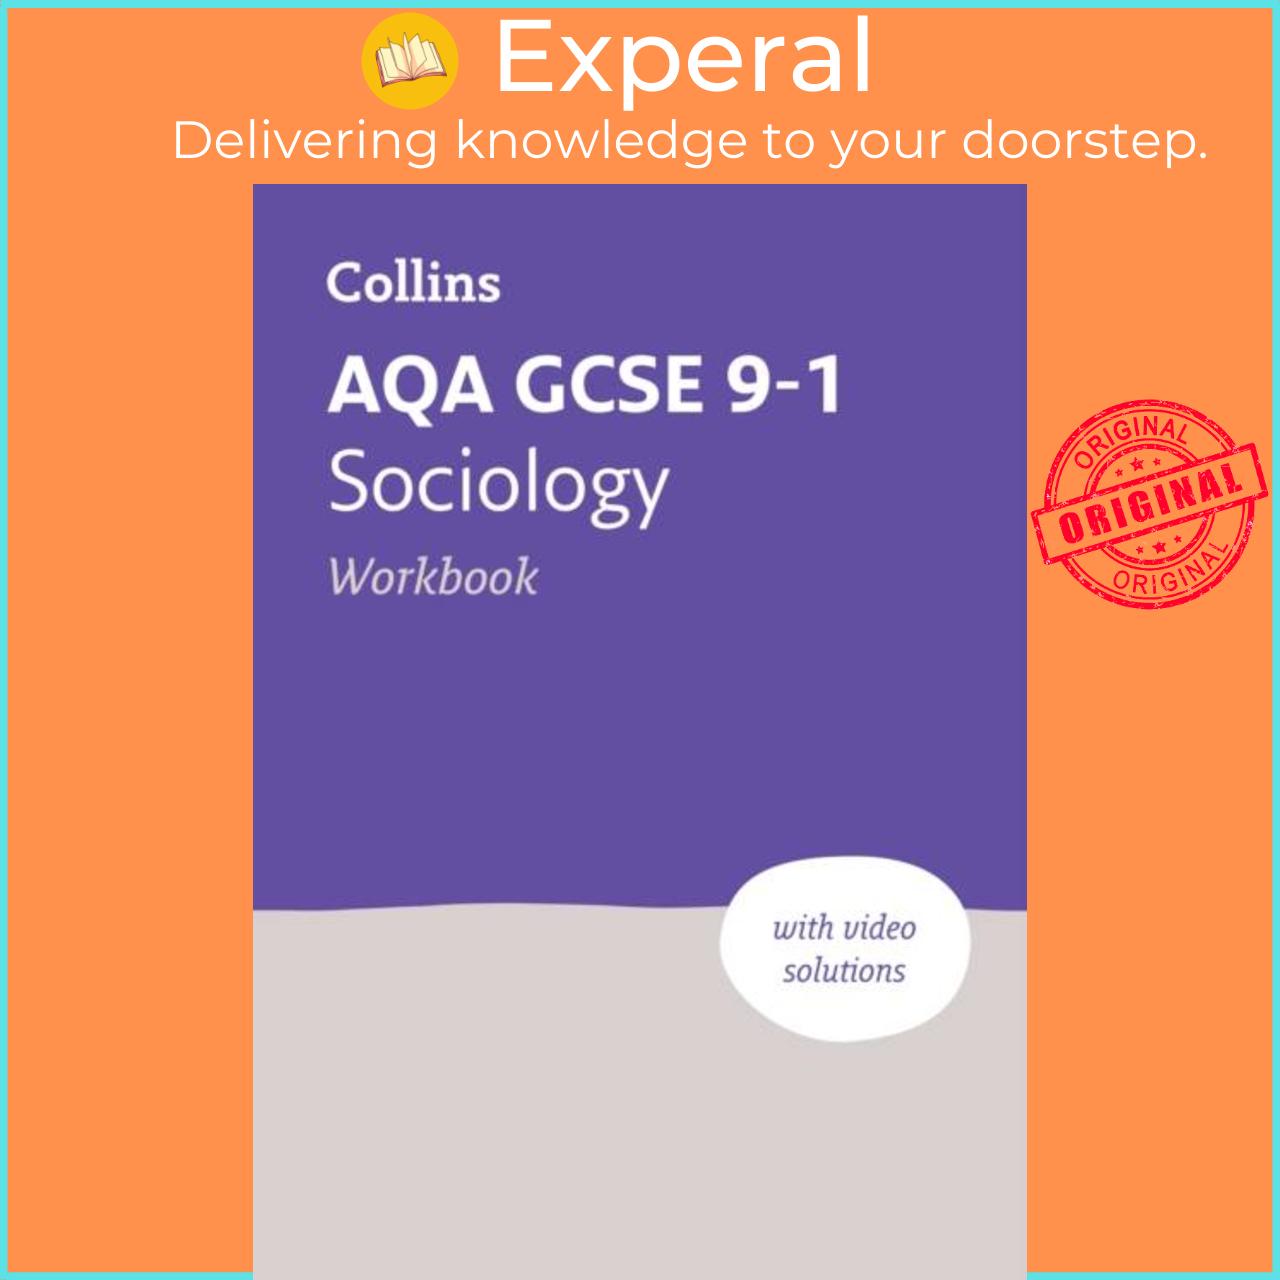 Sách - AQA GCSE 9-1 Sociology Workbook - Ideal for Home Learning, 2023 and 2024  by Collins GCSE (UK edition, paperback)